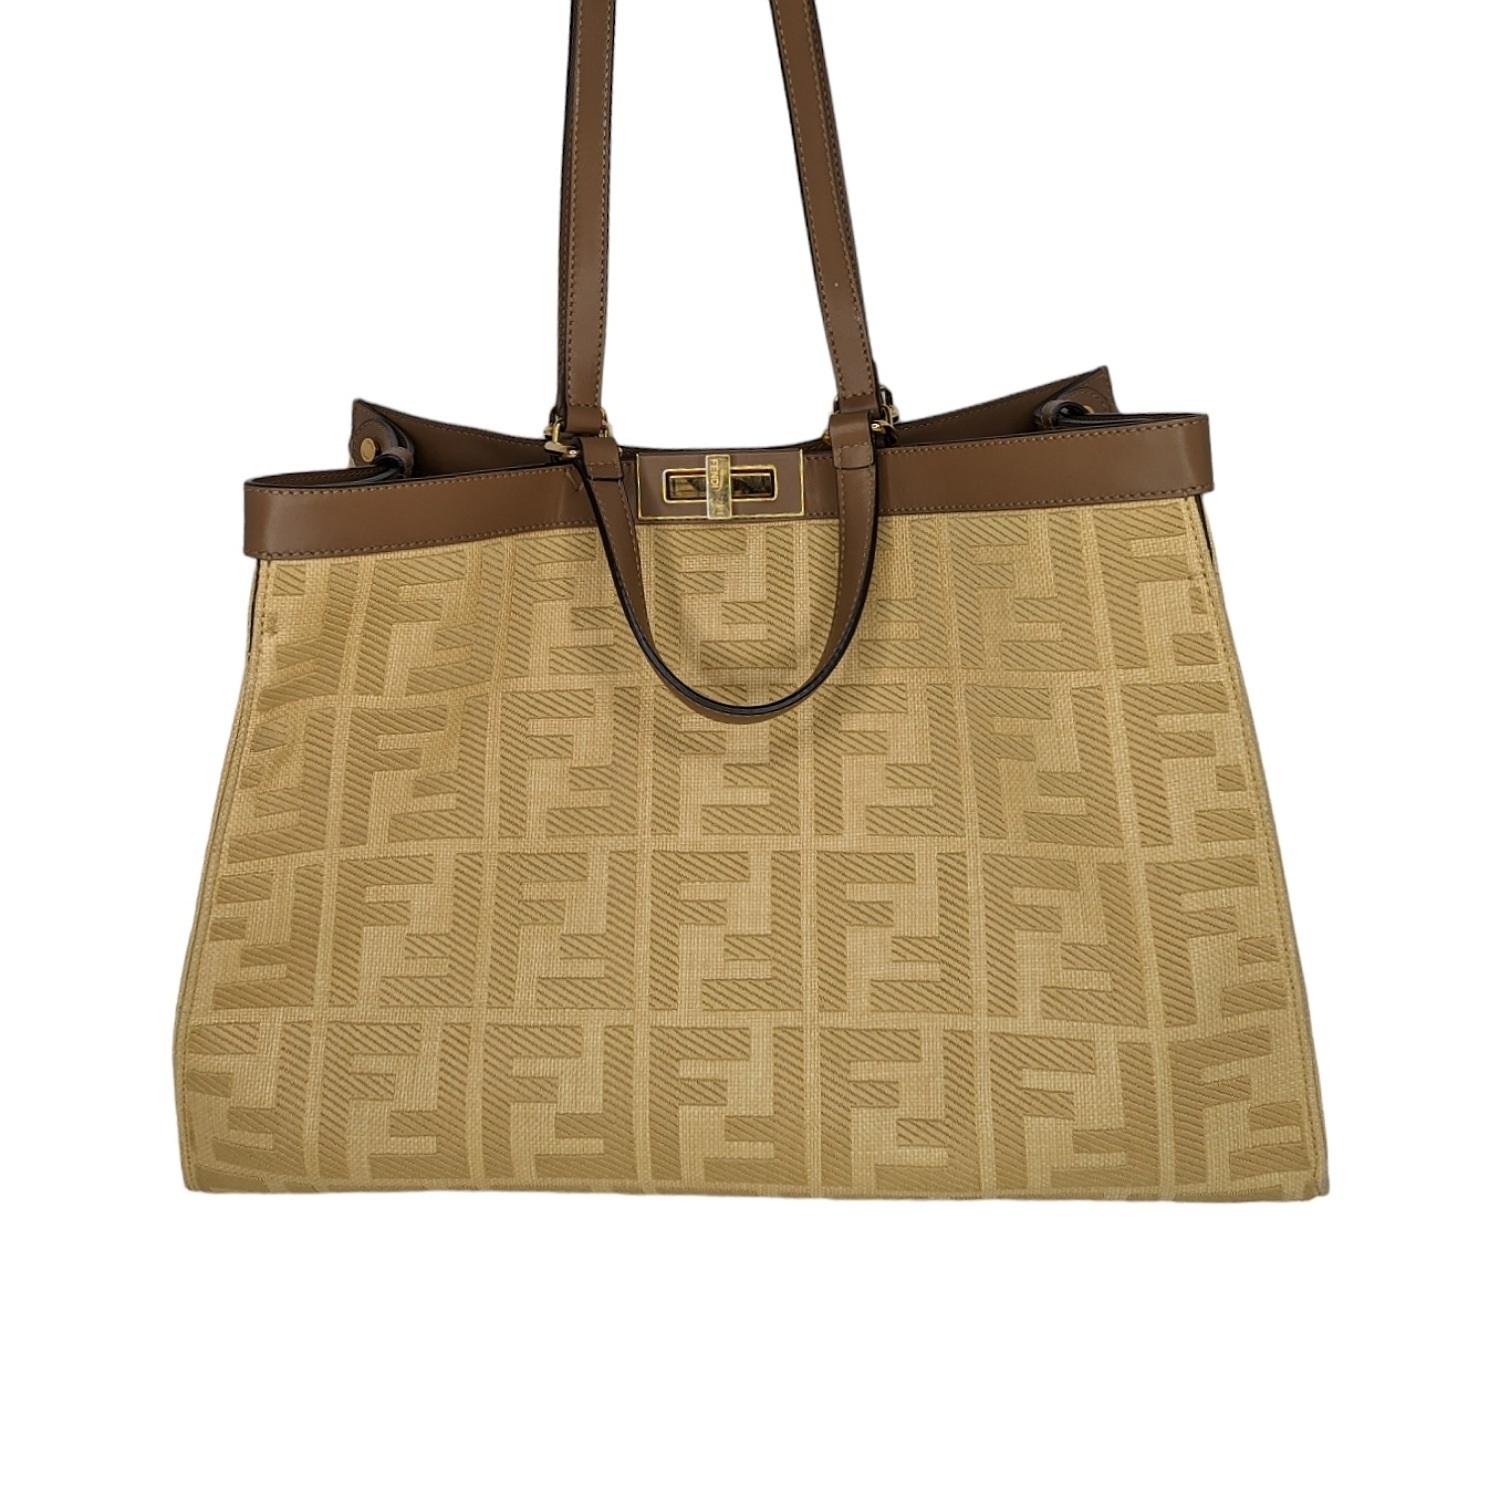 Medium X-Tote bag made of beige canvas with a tone on tone raised embroidery FF motif. Trimmed in brown leather and decorated with the classic twist lock. Unlined interior featuring a pocket with a press-stud fastening and gold-finish metalware.